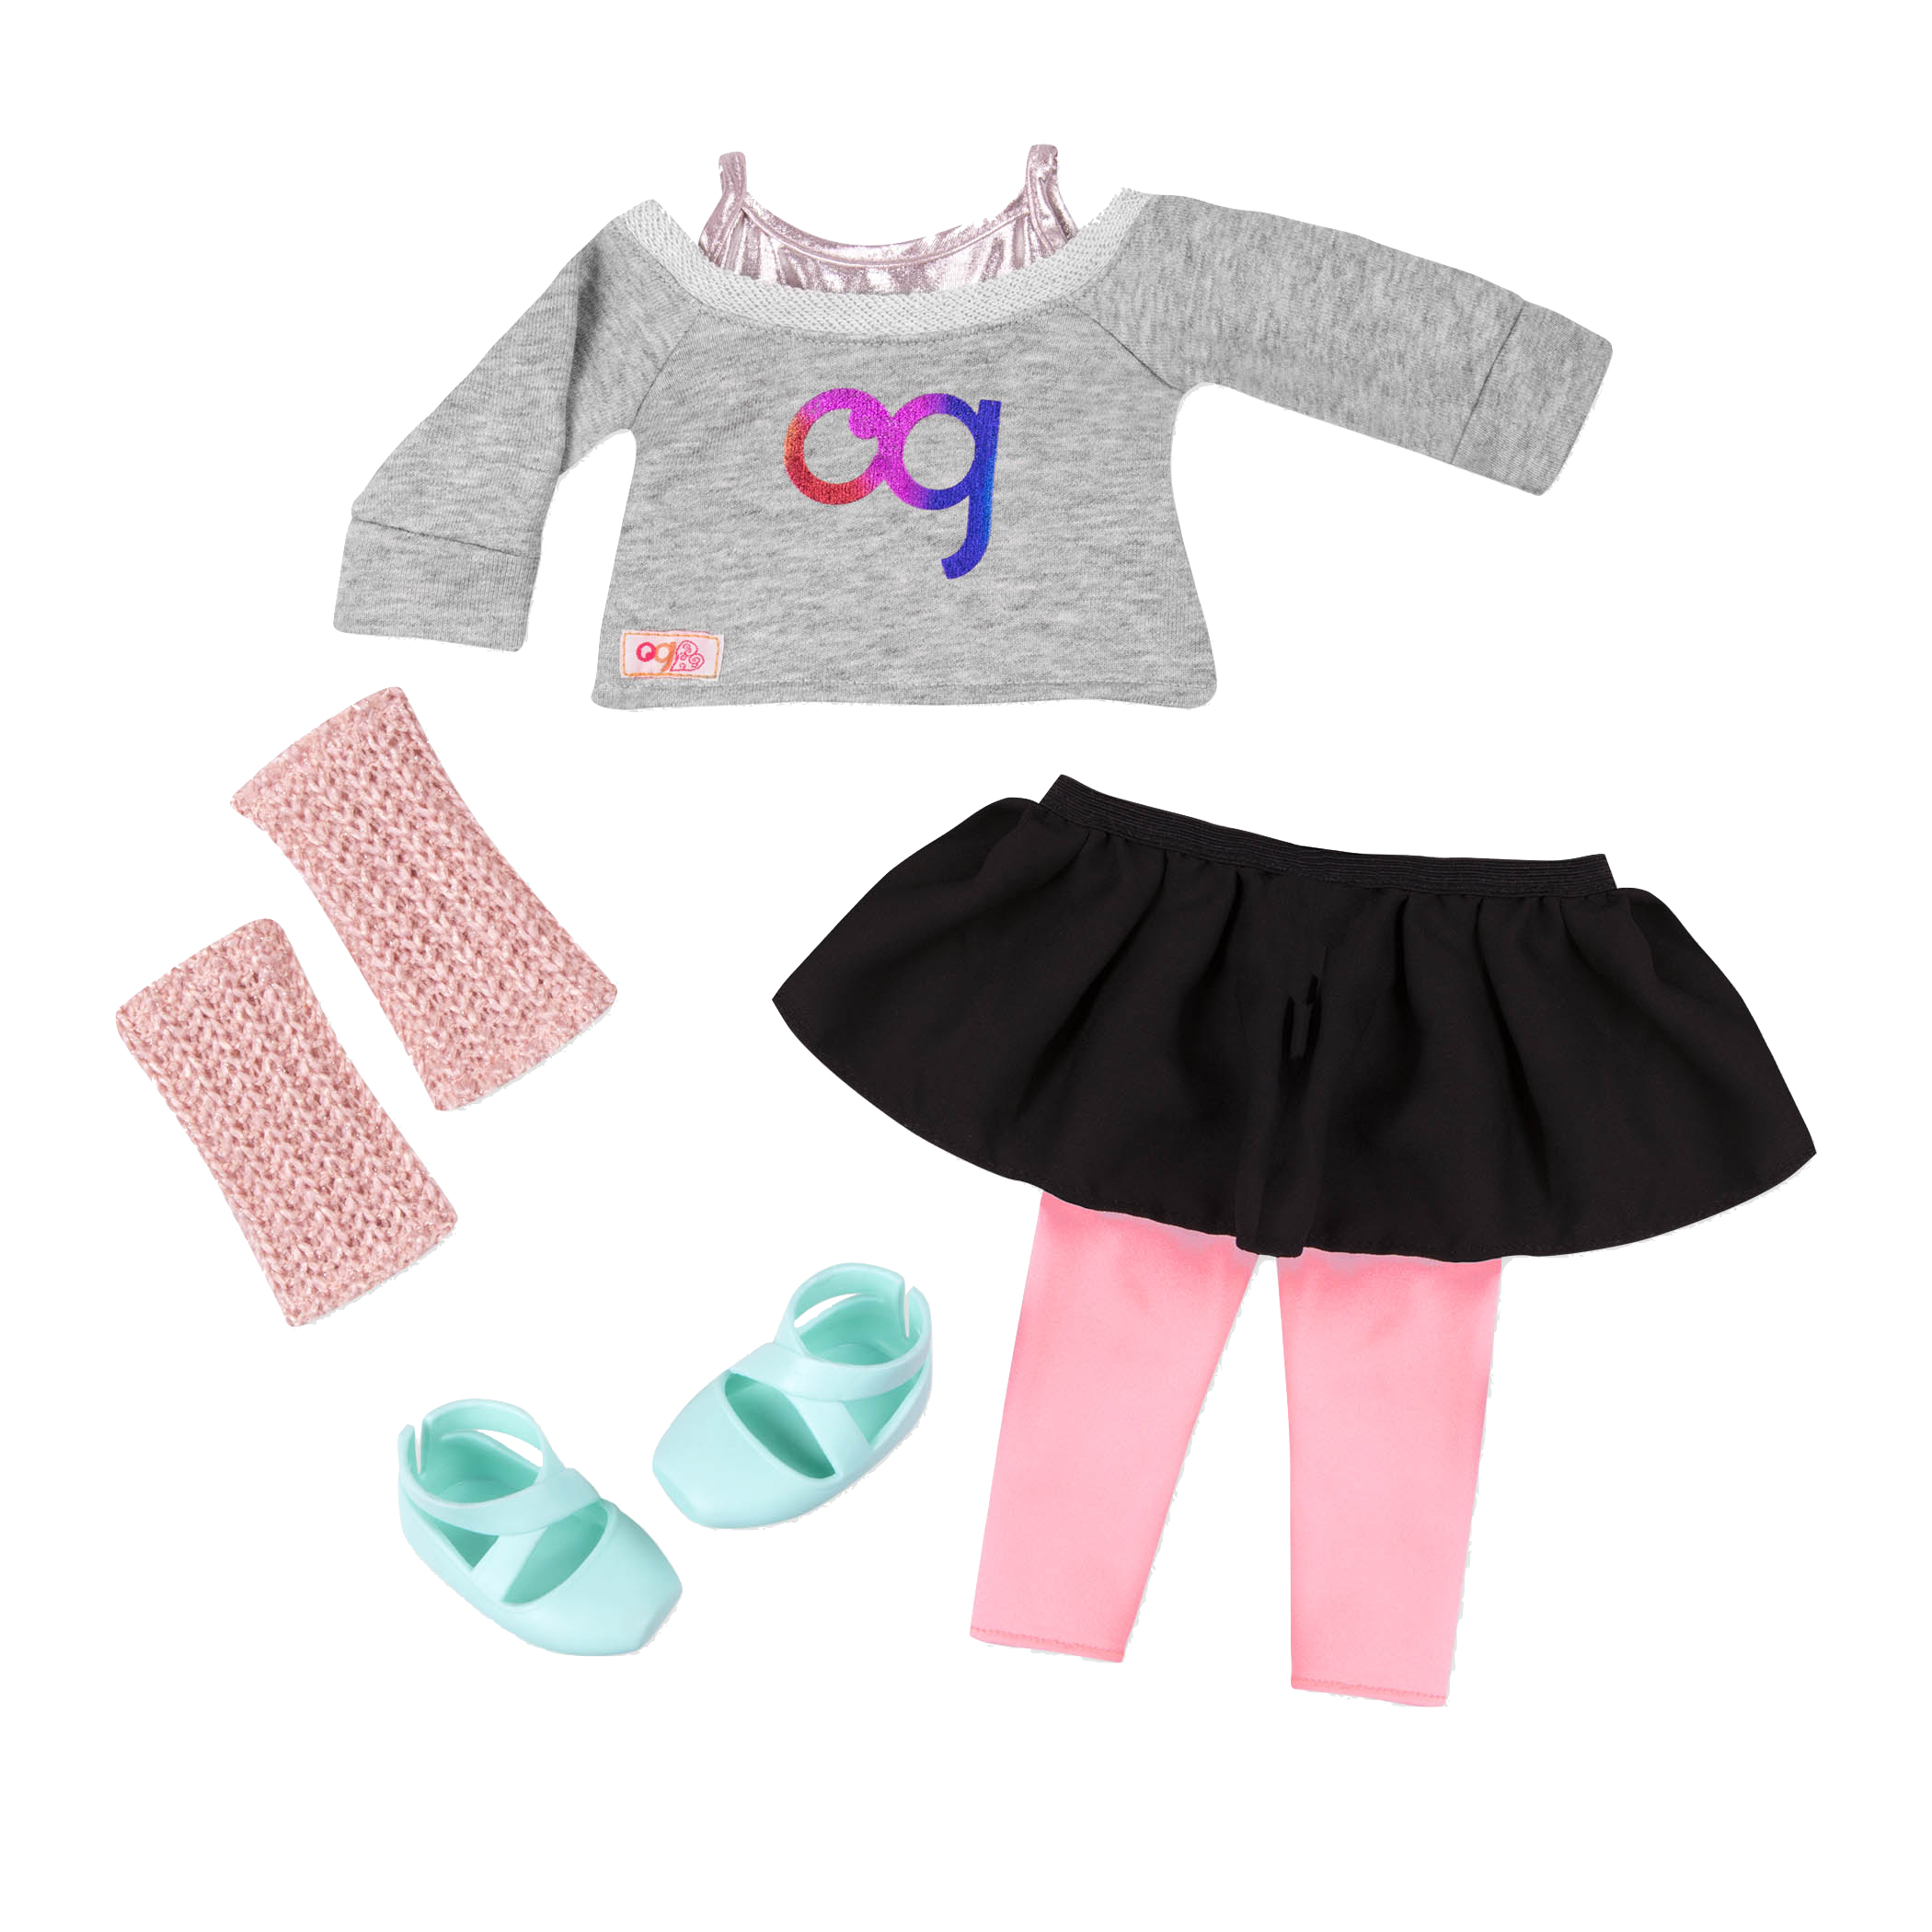 Warm Up Your Step ballet practice outfit